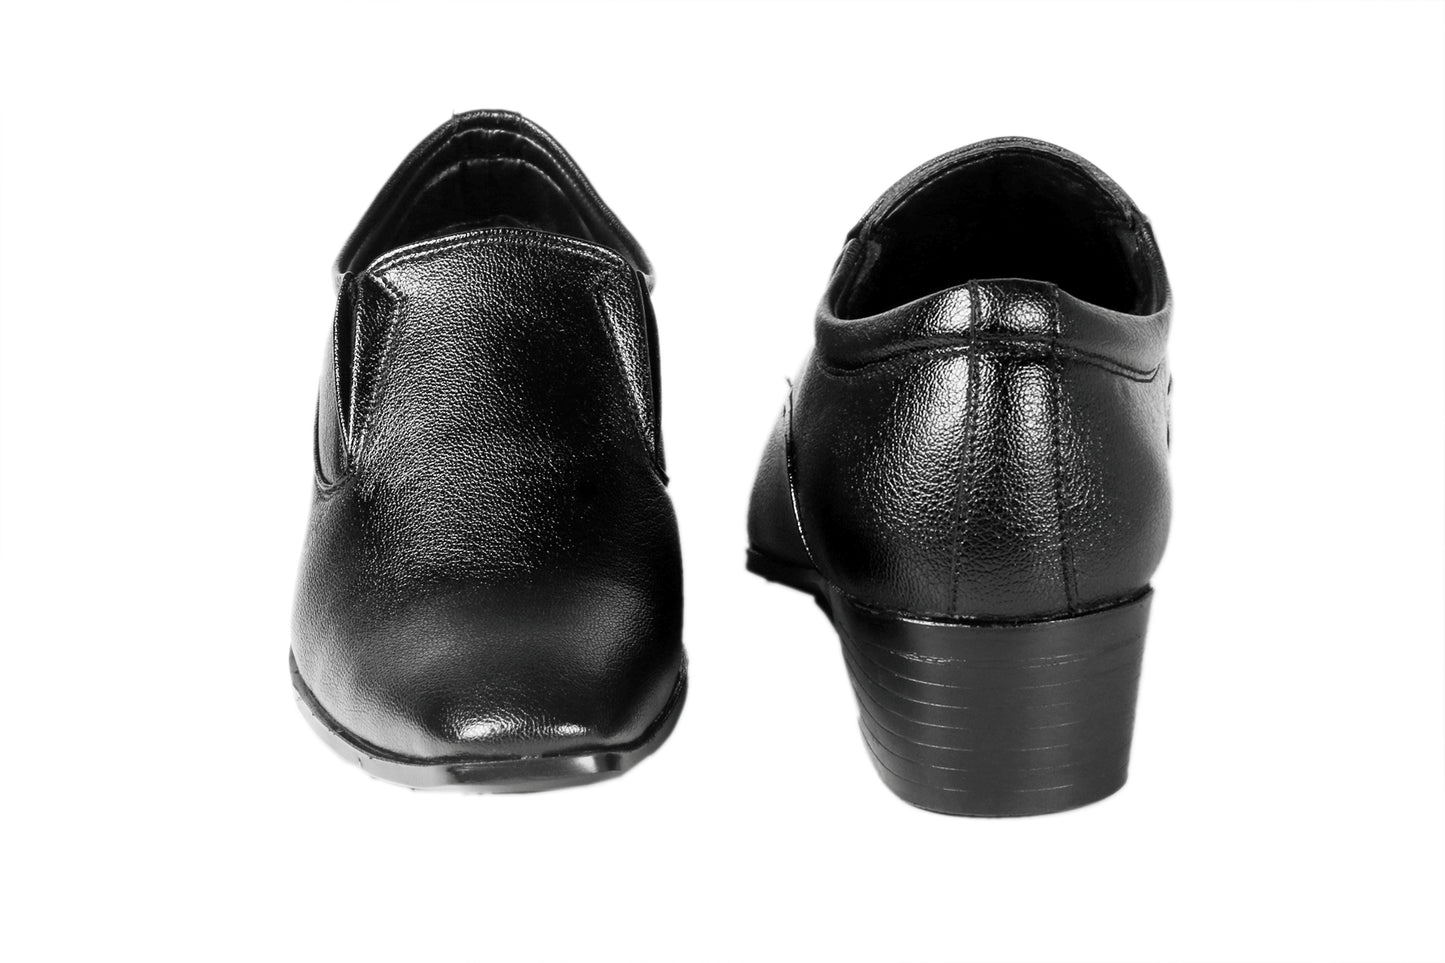 BXXY Men's Formal and Casual Wear Height Increasing Slip-On Stylish and Latest Shoes